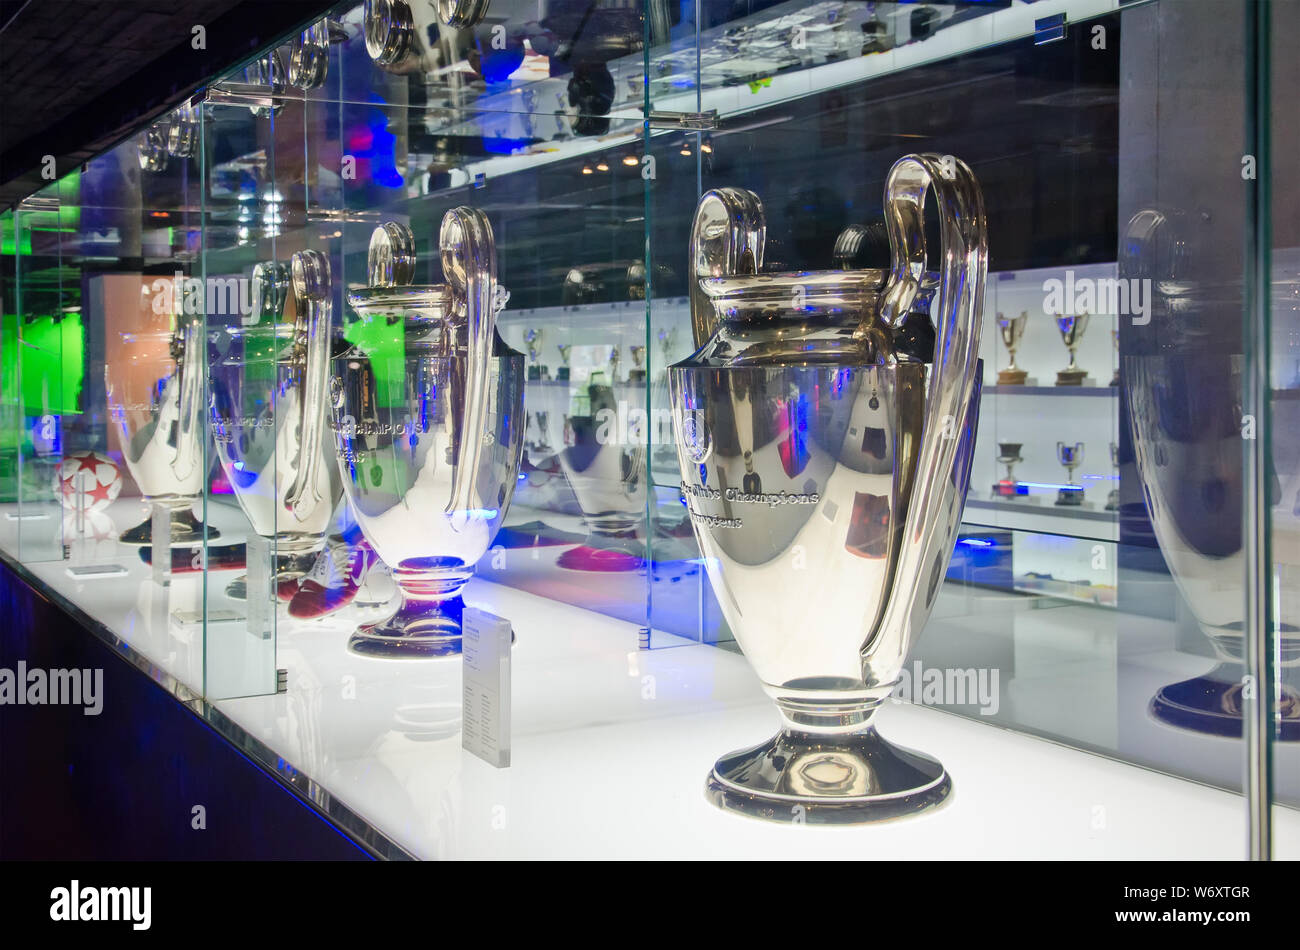 Fc Barcelona Museum High Resolution Stock Photography and Images - Alamy